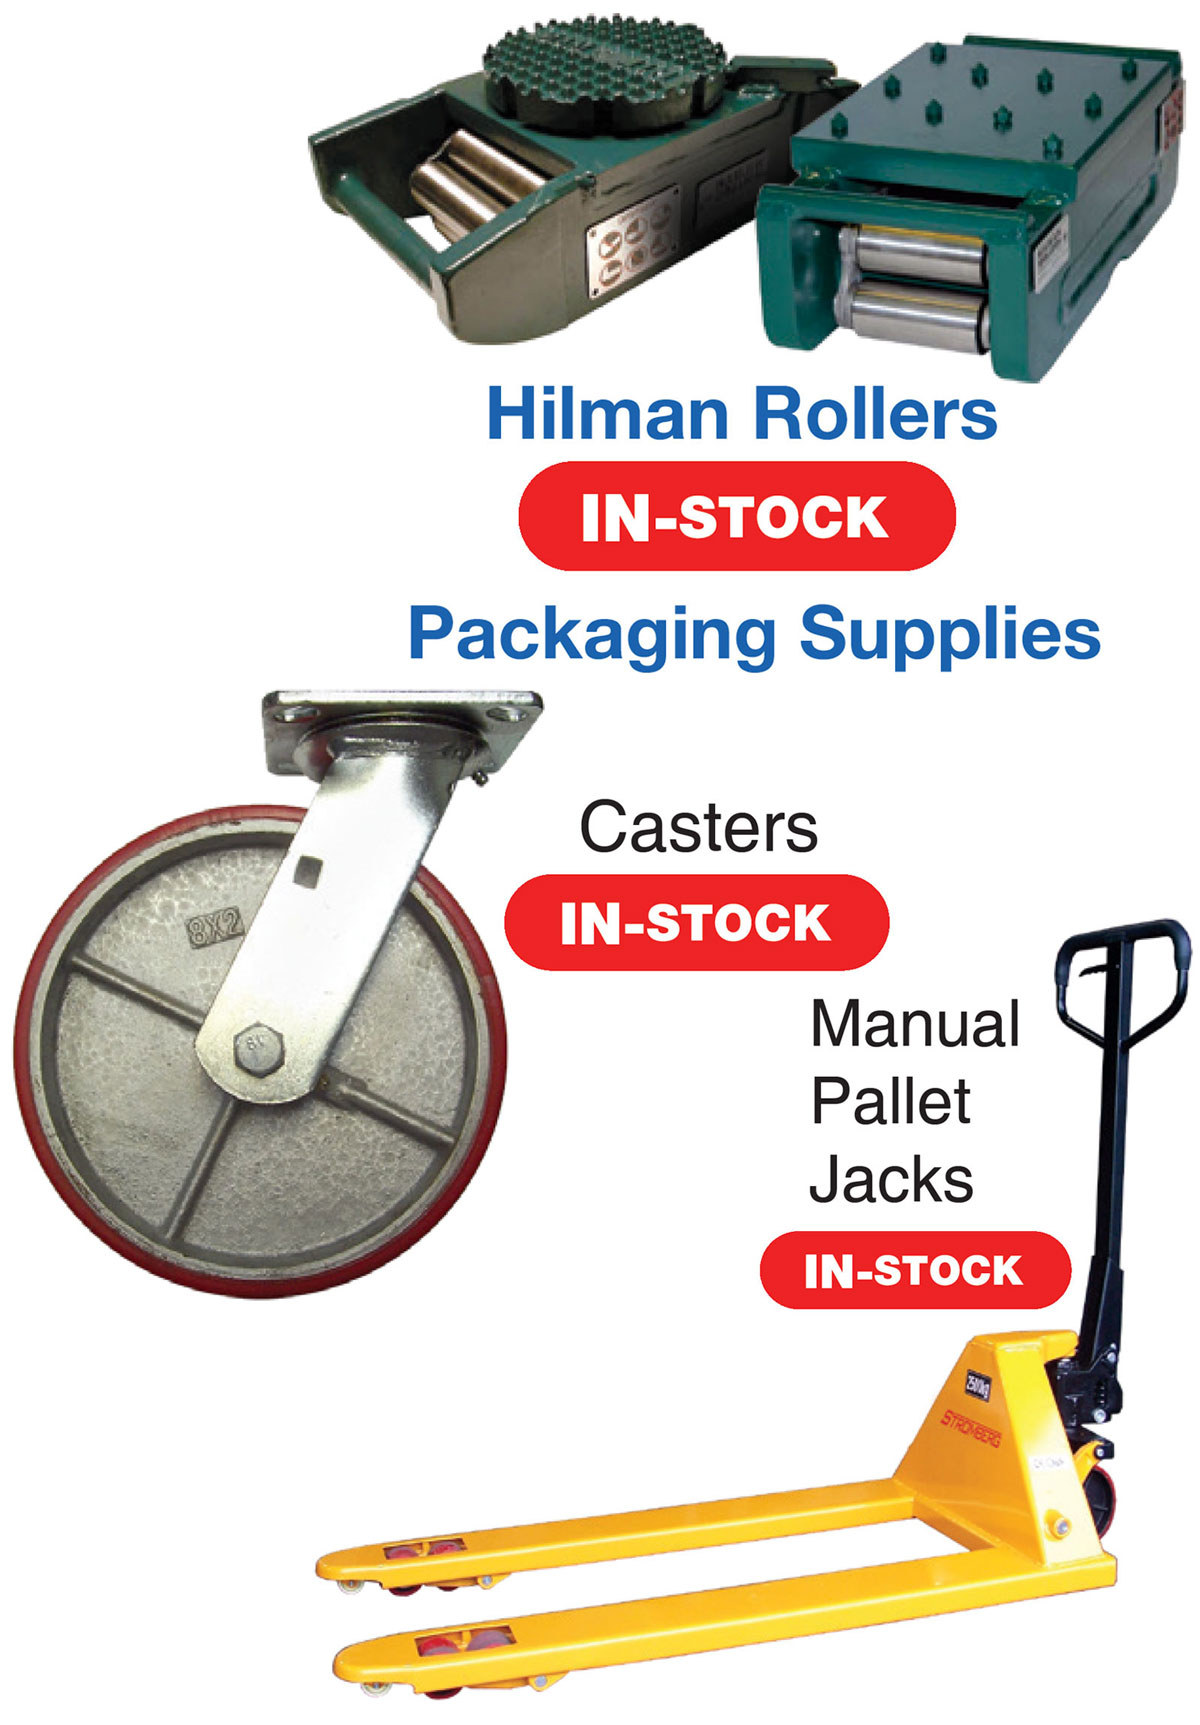 Hilman Rollers, Casters, and Manual Pallet Jacks